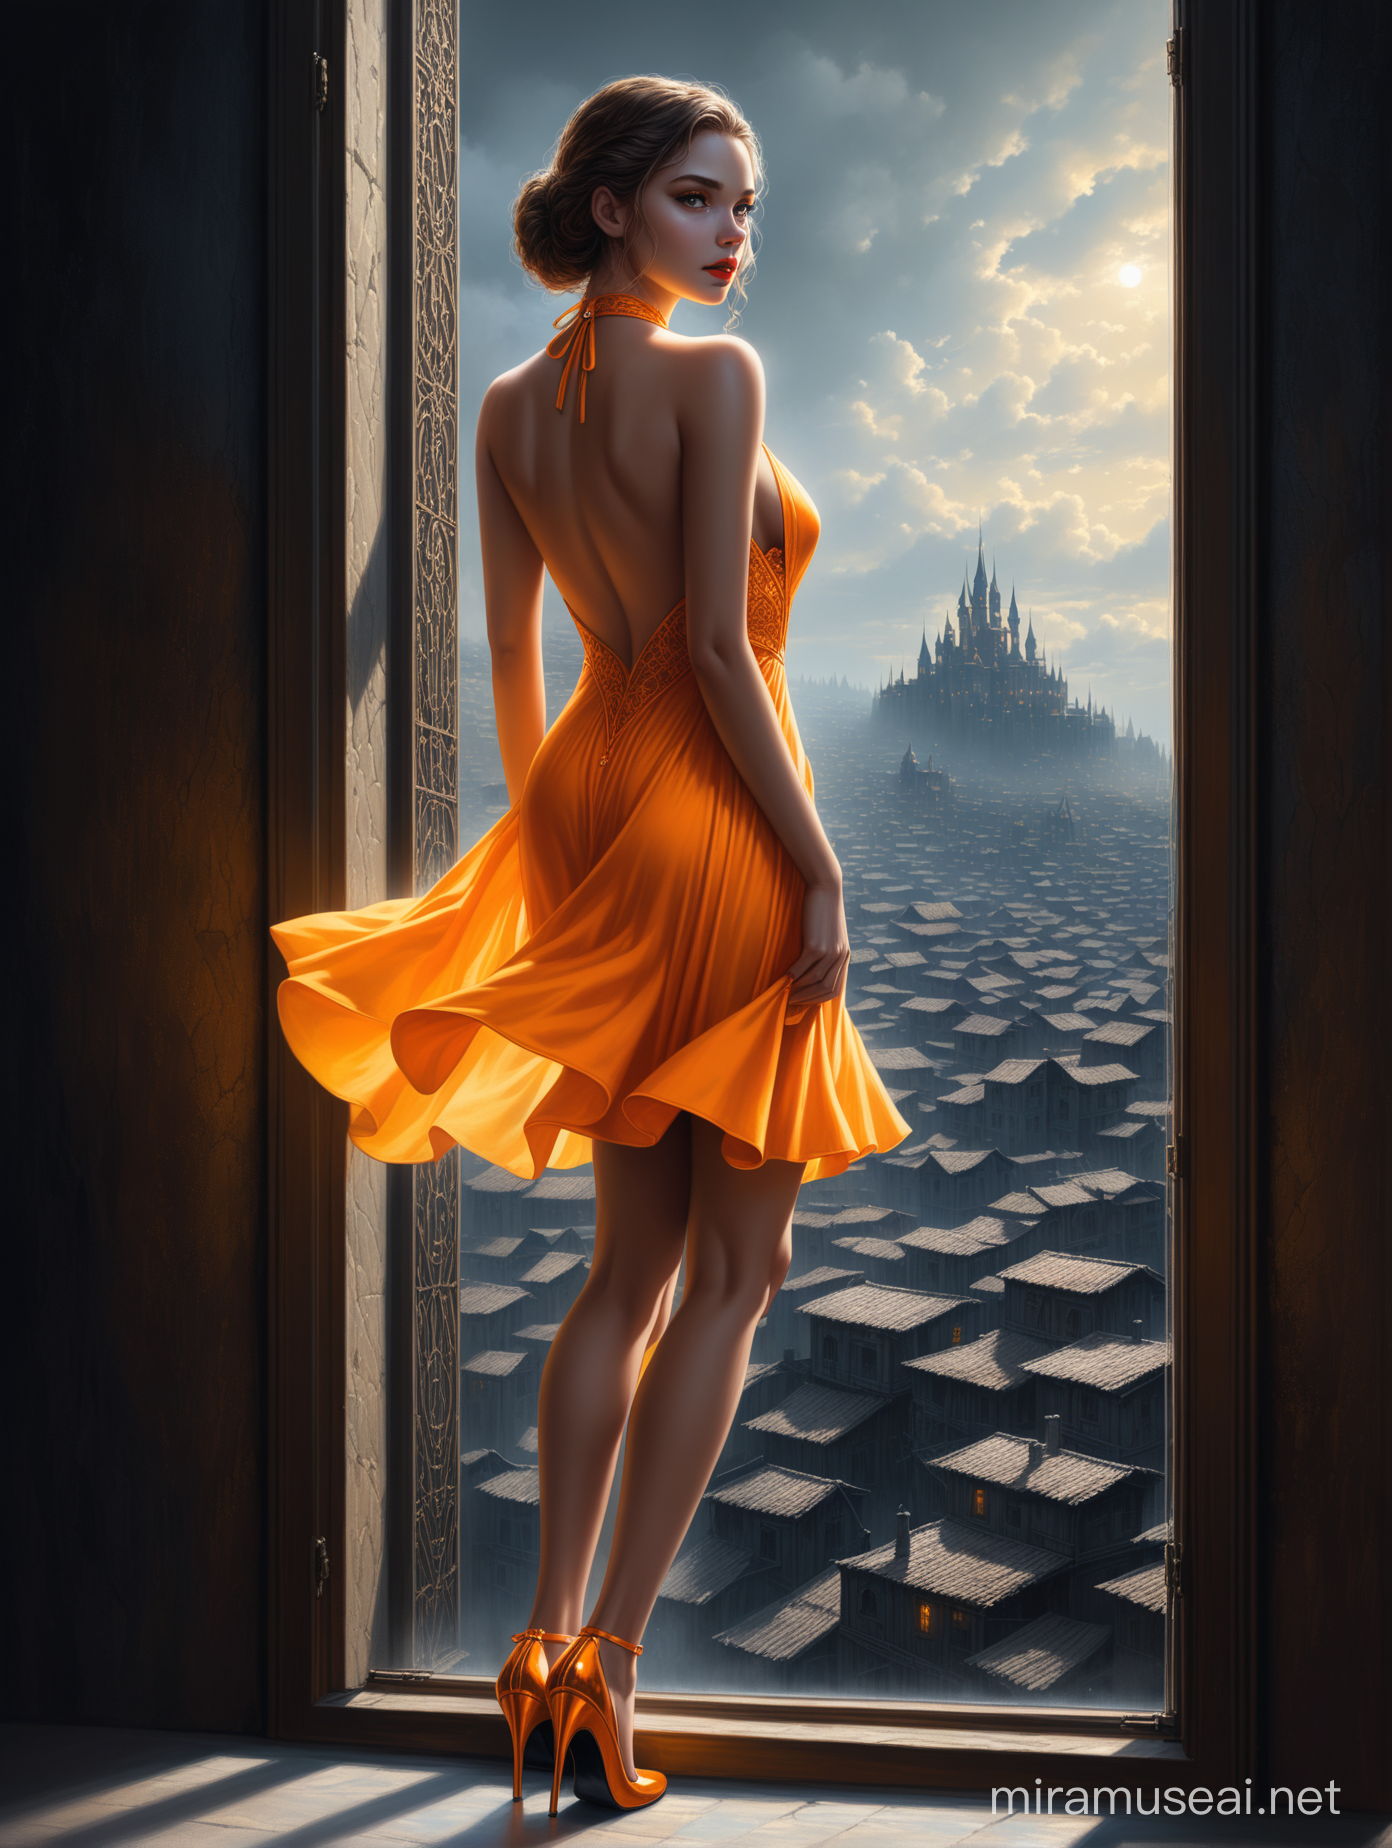 Neon Orange and Yellow Halter Dress Woman Gazing Anxiously Out Window